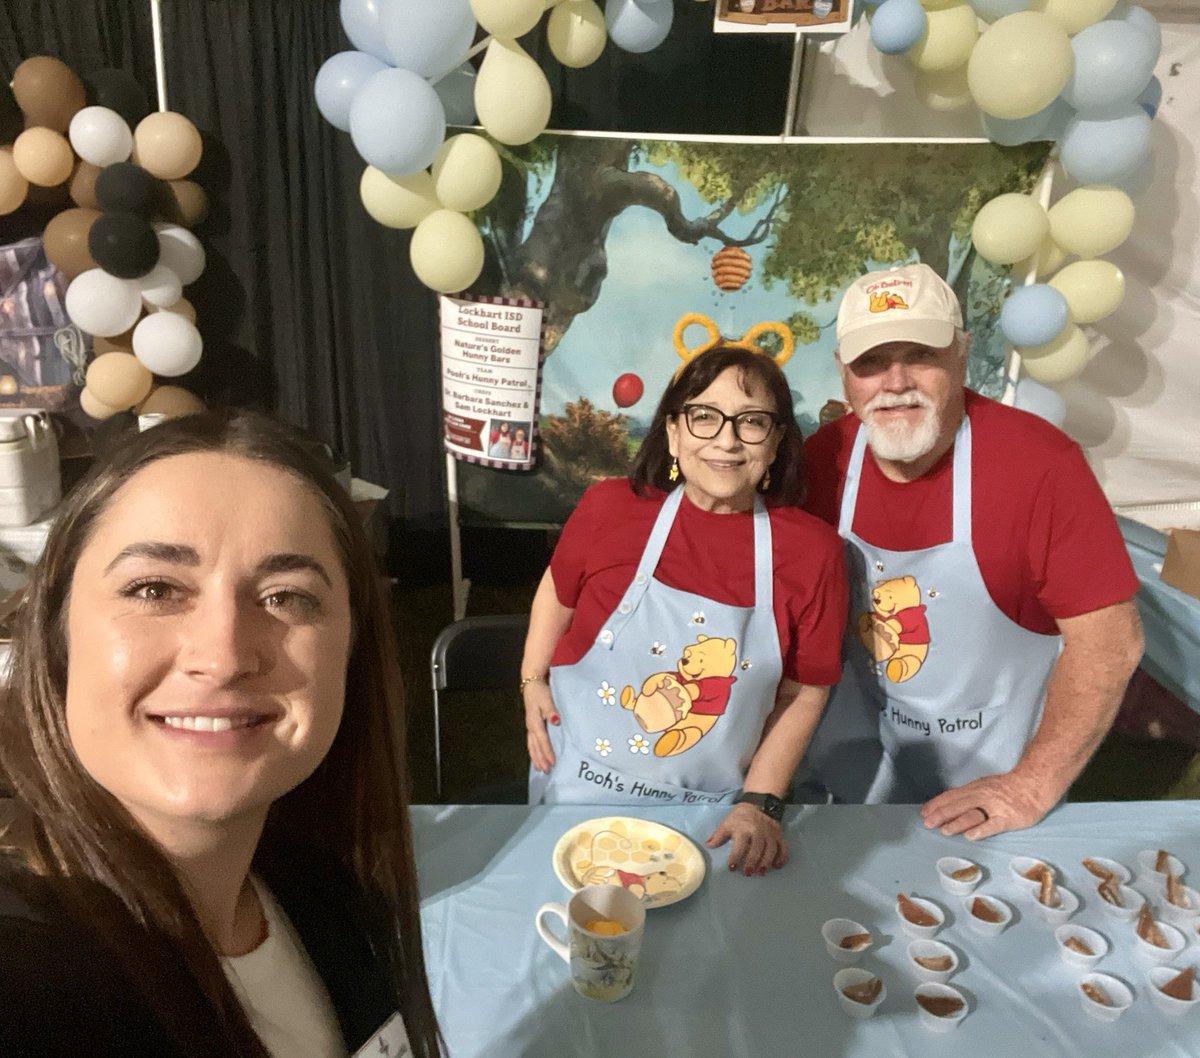 50 lions who can cook, fundraiser for The Education Foundation for Lockhart ISD was a SUCCESS. Going to dream about those honey bars. #FundPublicSchools #VenableForTexas #FundPublicEducation #NoSchoolVouchers